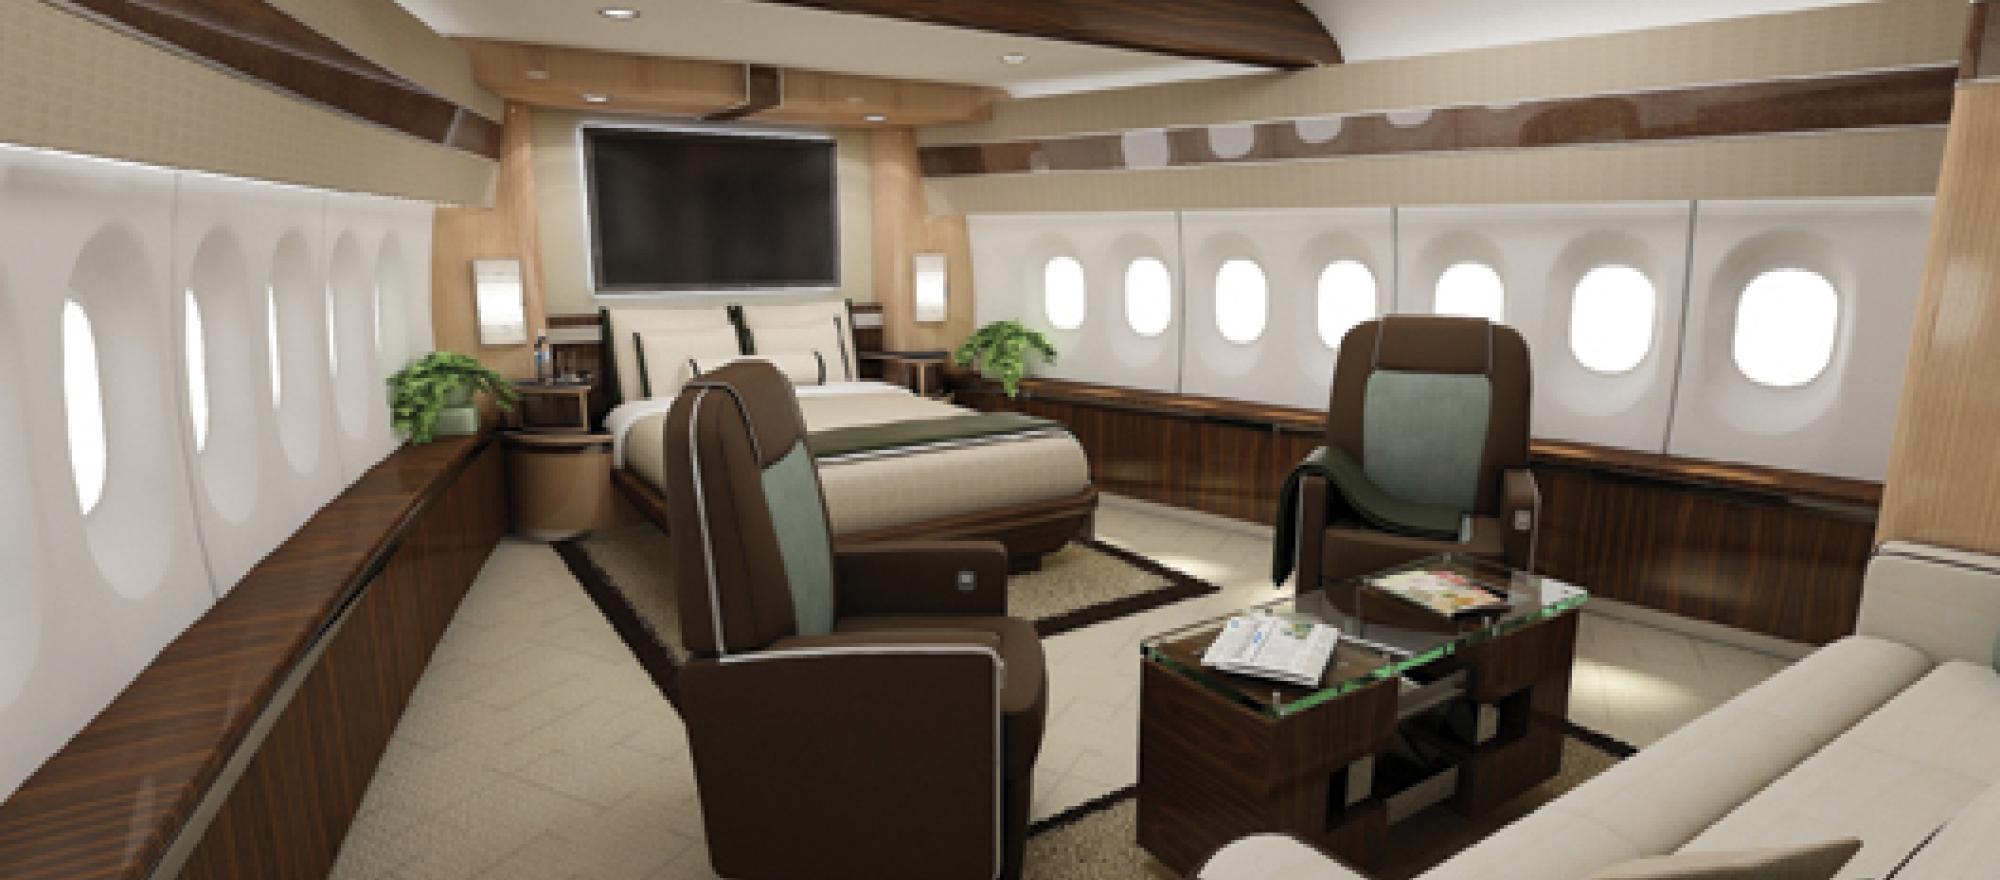 You’re not likely to feel cramped in a Boeing 747-8 master suite. This propos